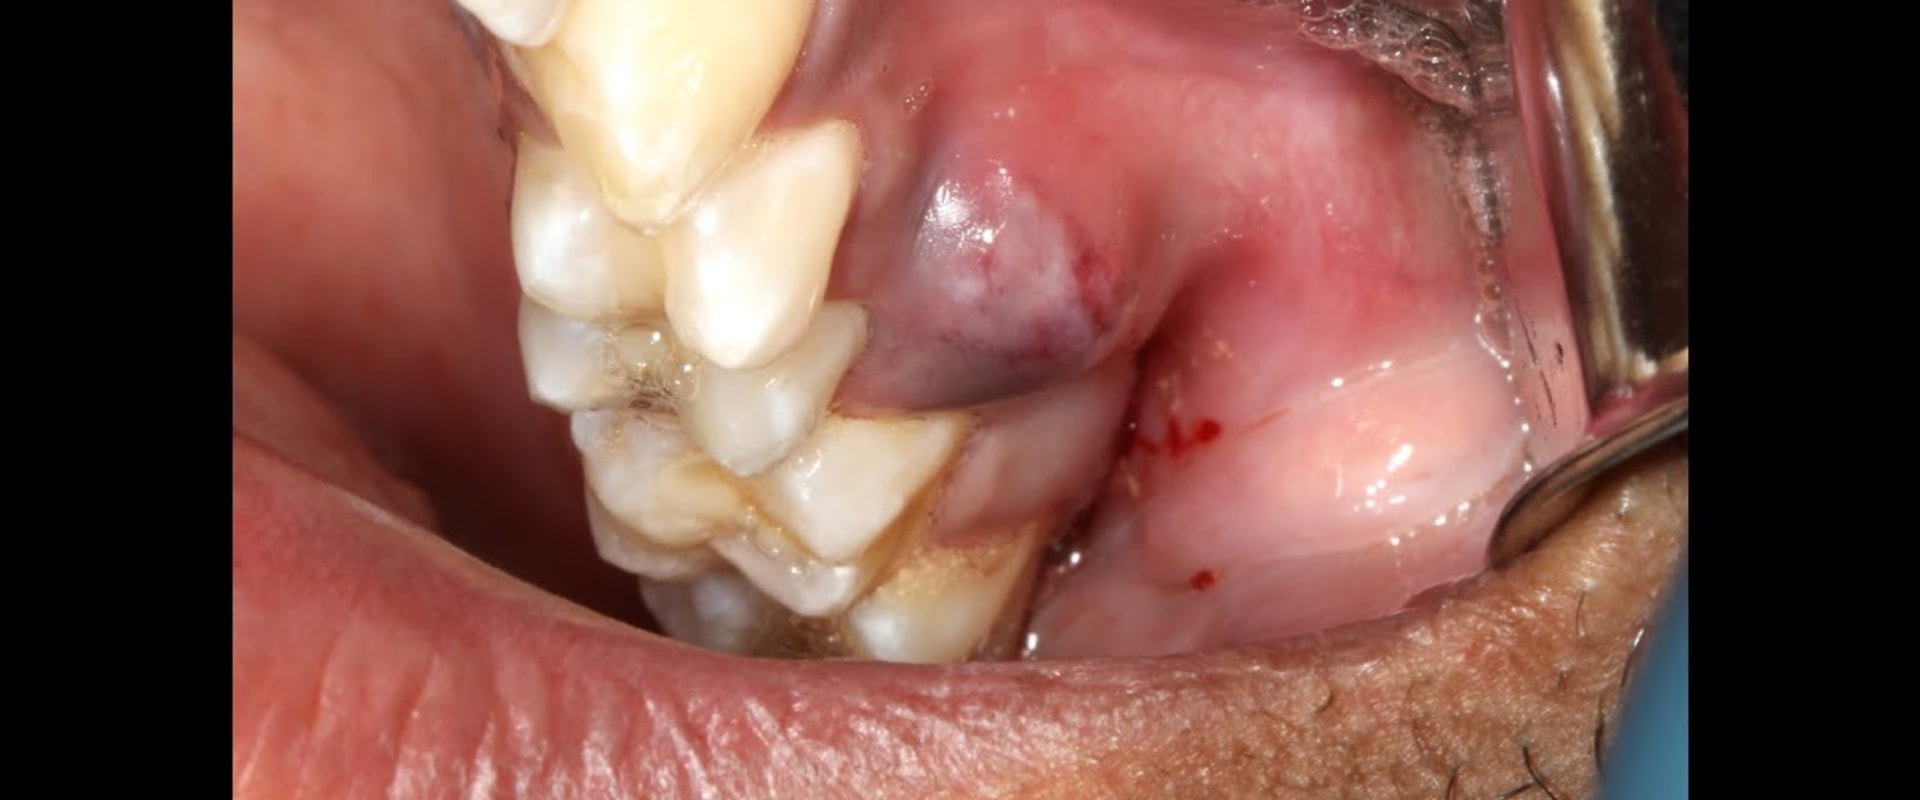 Can a Dentist Pull an Infected Tooth?